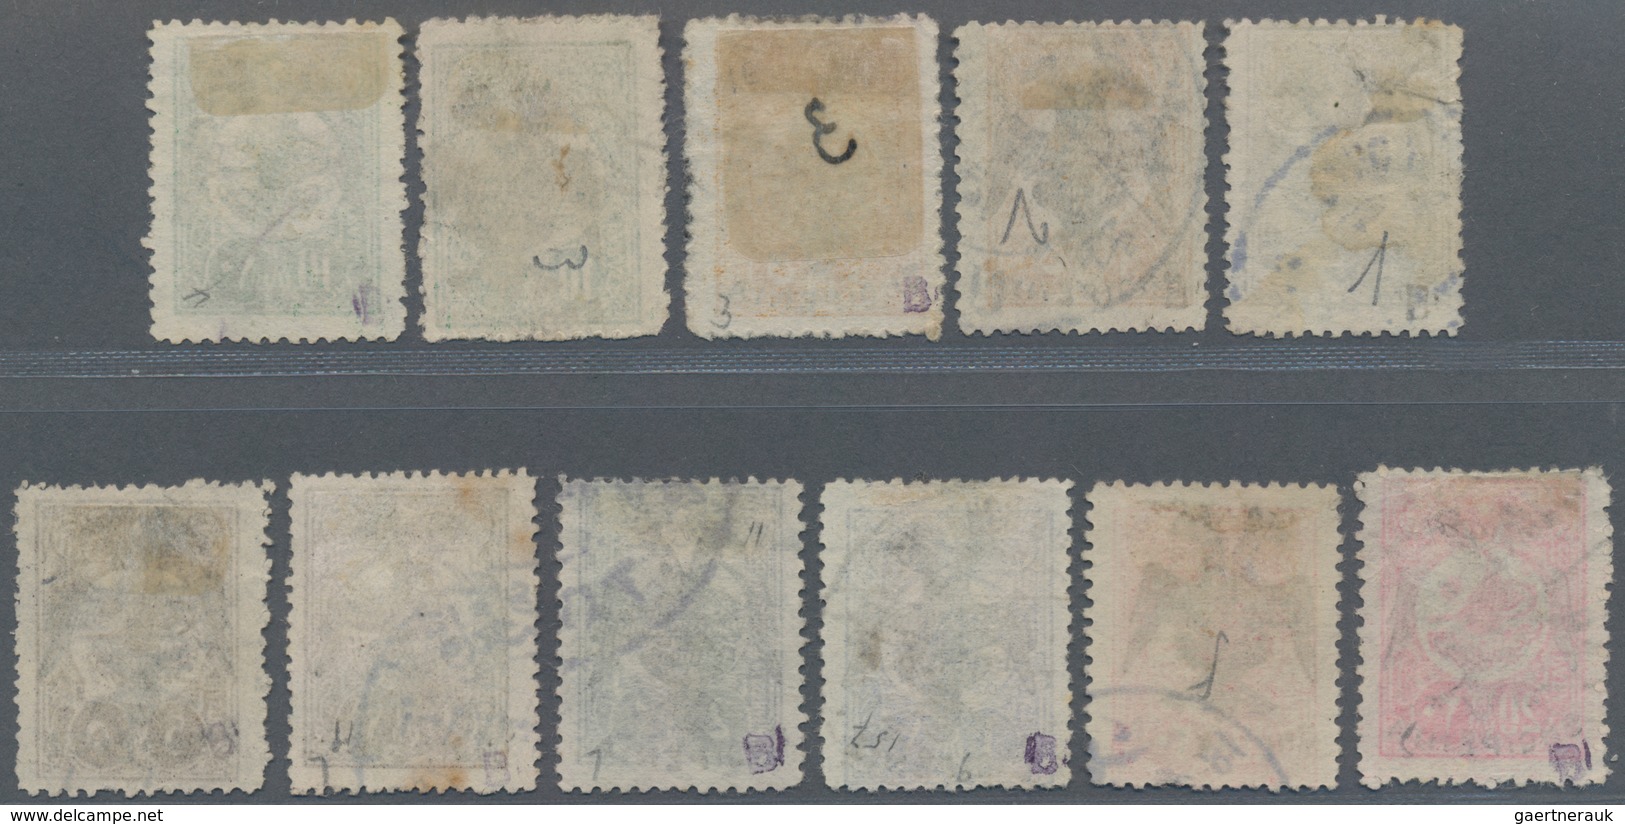 Albanien: 1913, Turkish Stamps Handstamped With Double-headed Eagle And 'SHQIPËNIA' 11 Stamps Incl. - Albanië